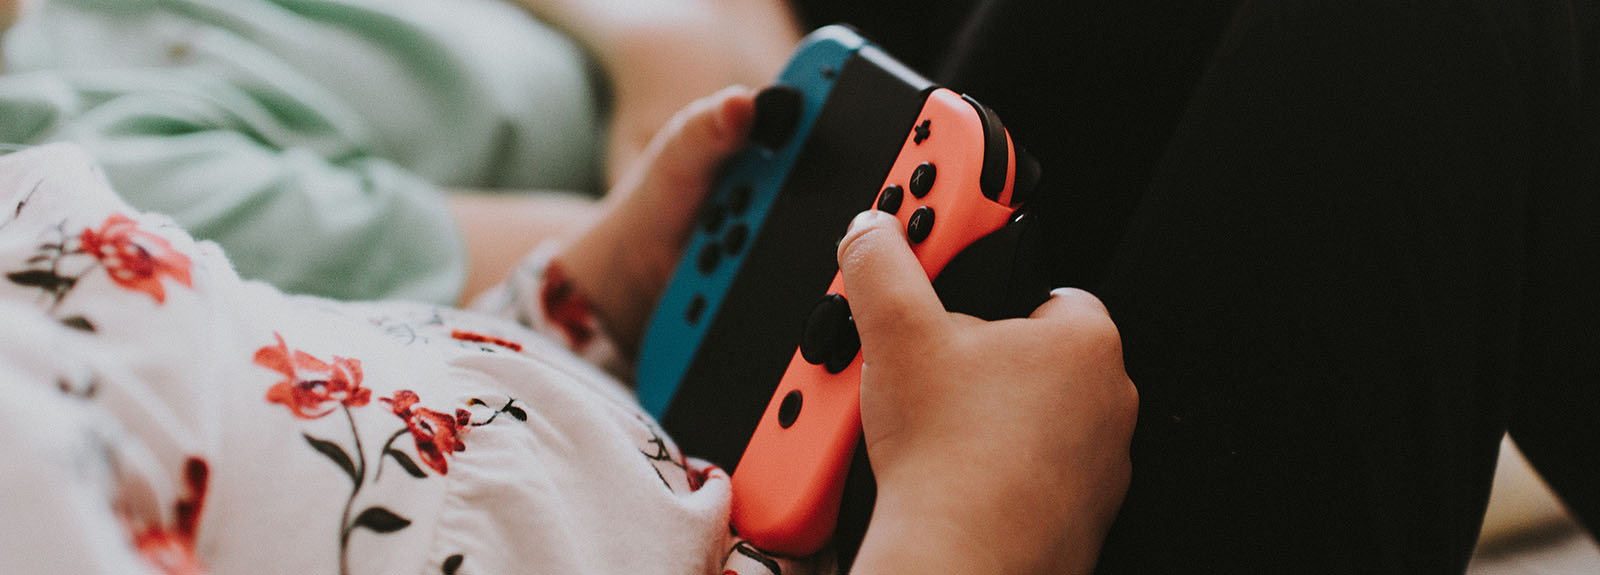 Kid and games controller